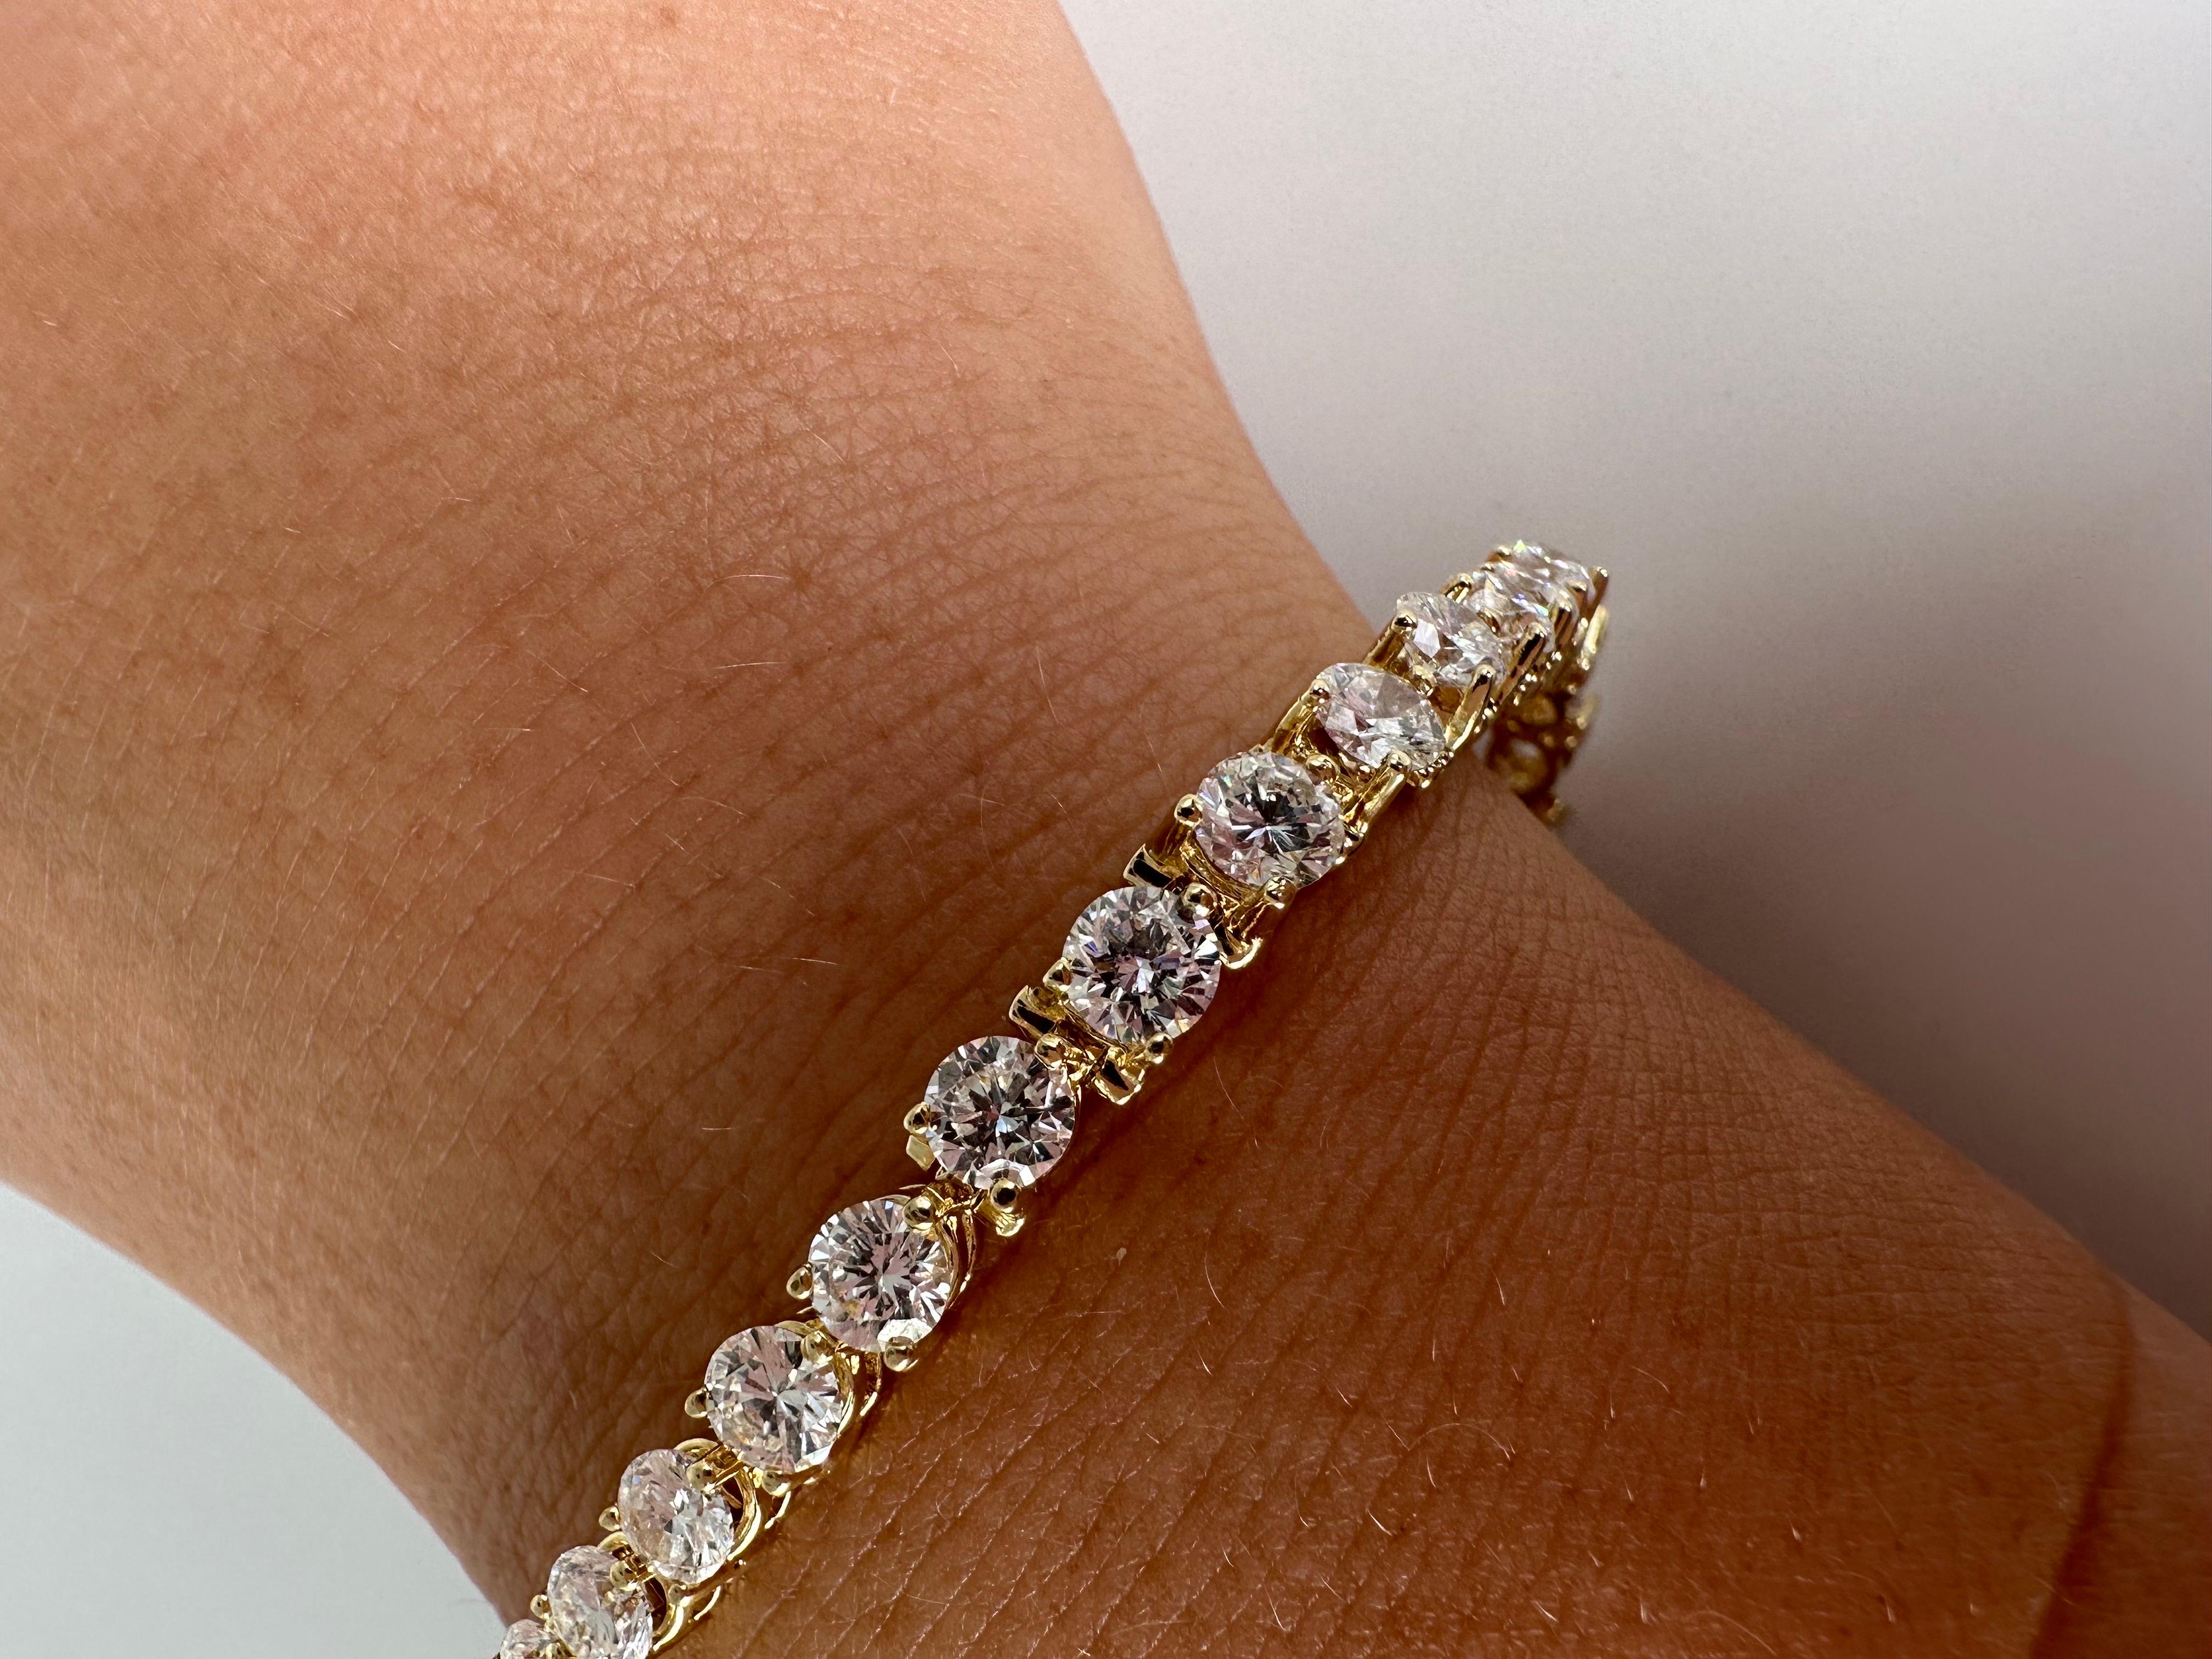 Remarkable diamond bracelet in 14KT yellow gold, the links carefully made in trio design are polished to perfection and added one onto another, this is a luxurious tennis bracelet that will look fabulous with any outfit!

GOLD: 18KT gold
NATURAL